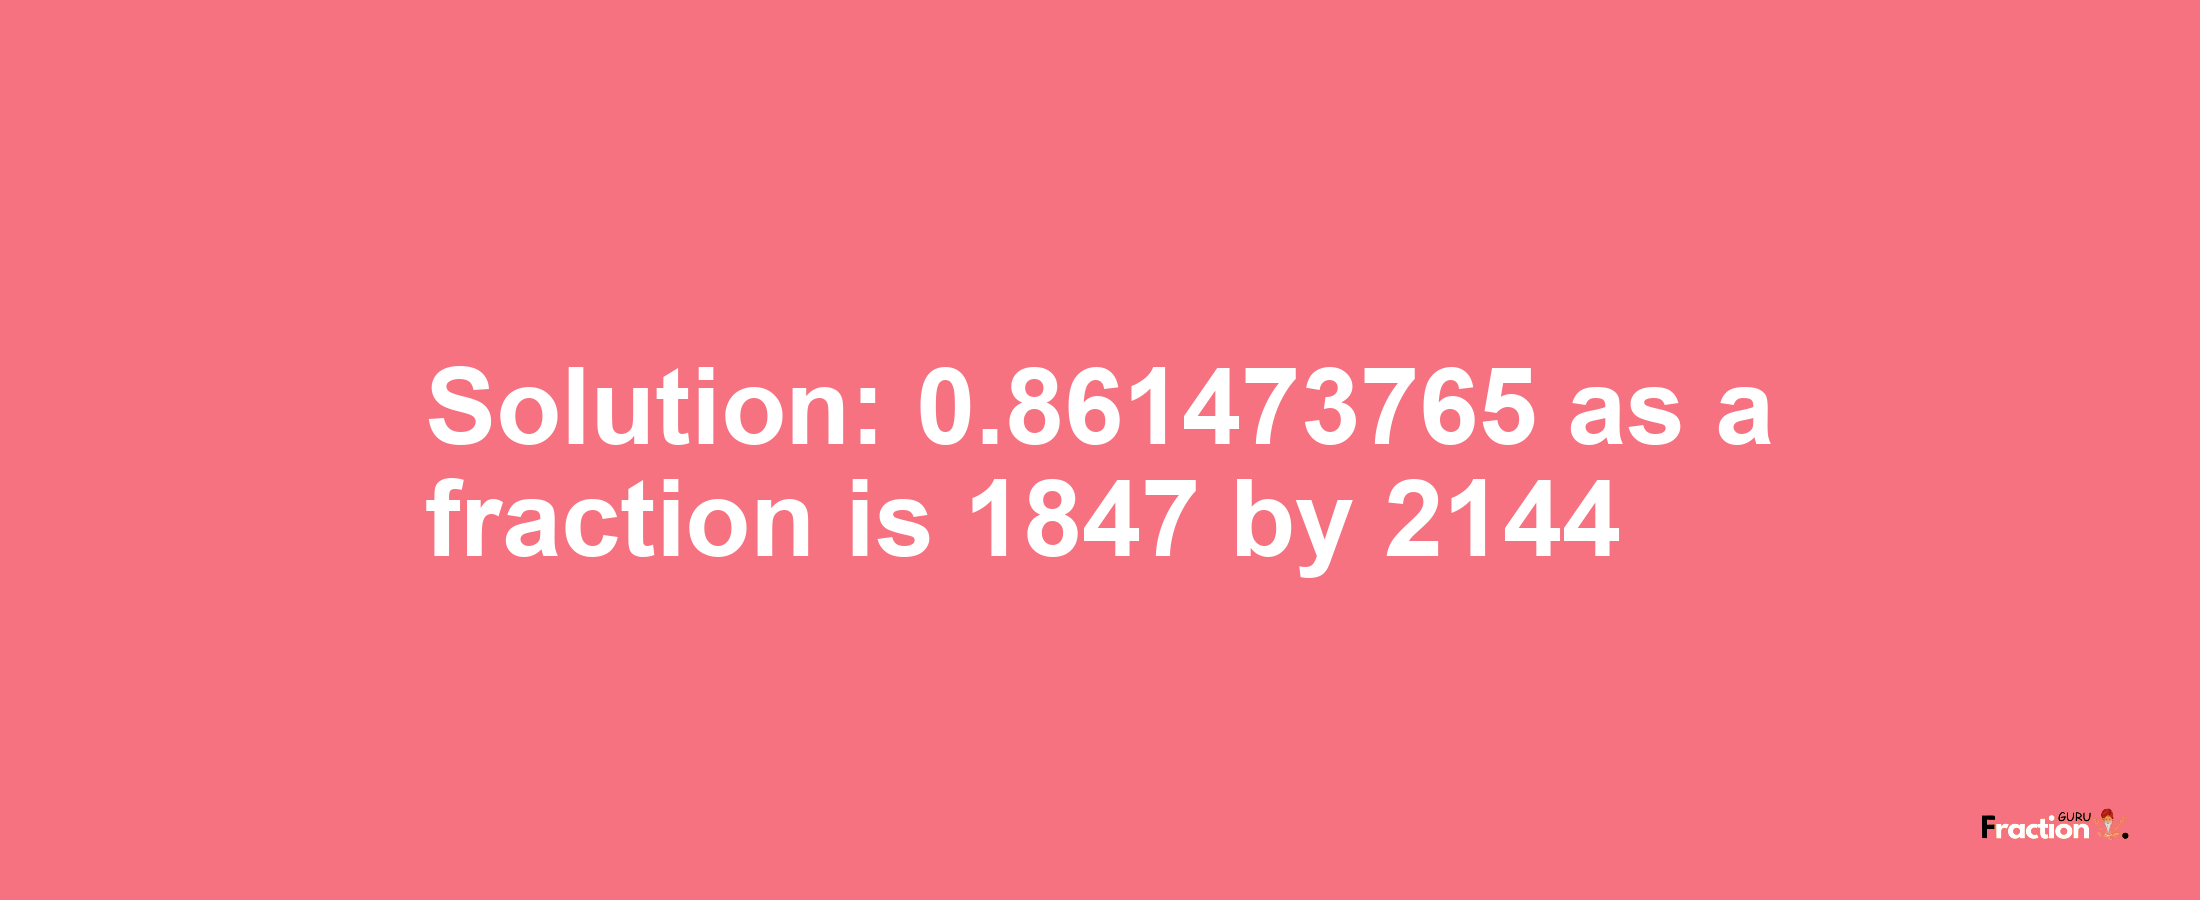 Solution:0.861473765 as a fraction is 1847/2144